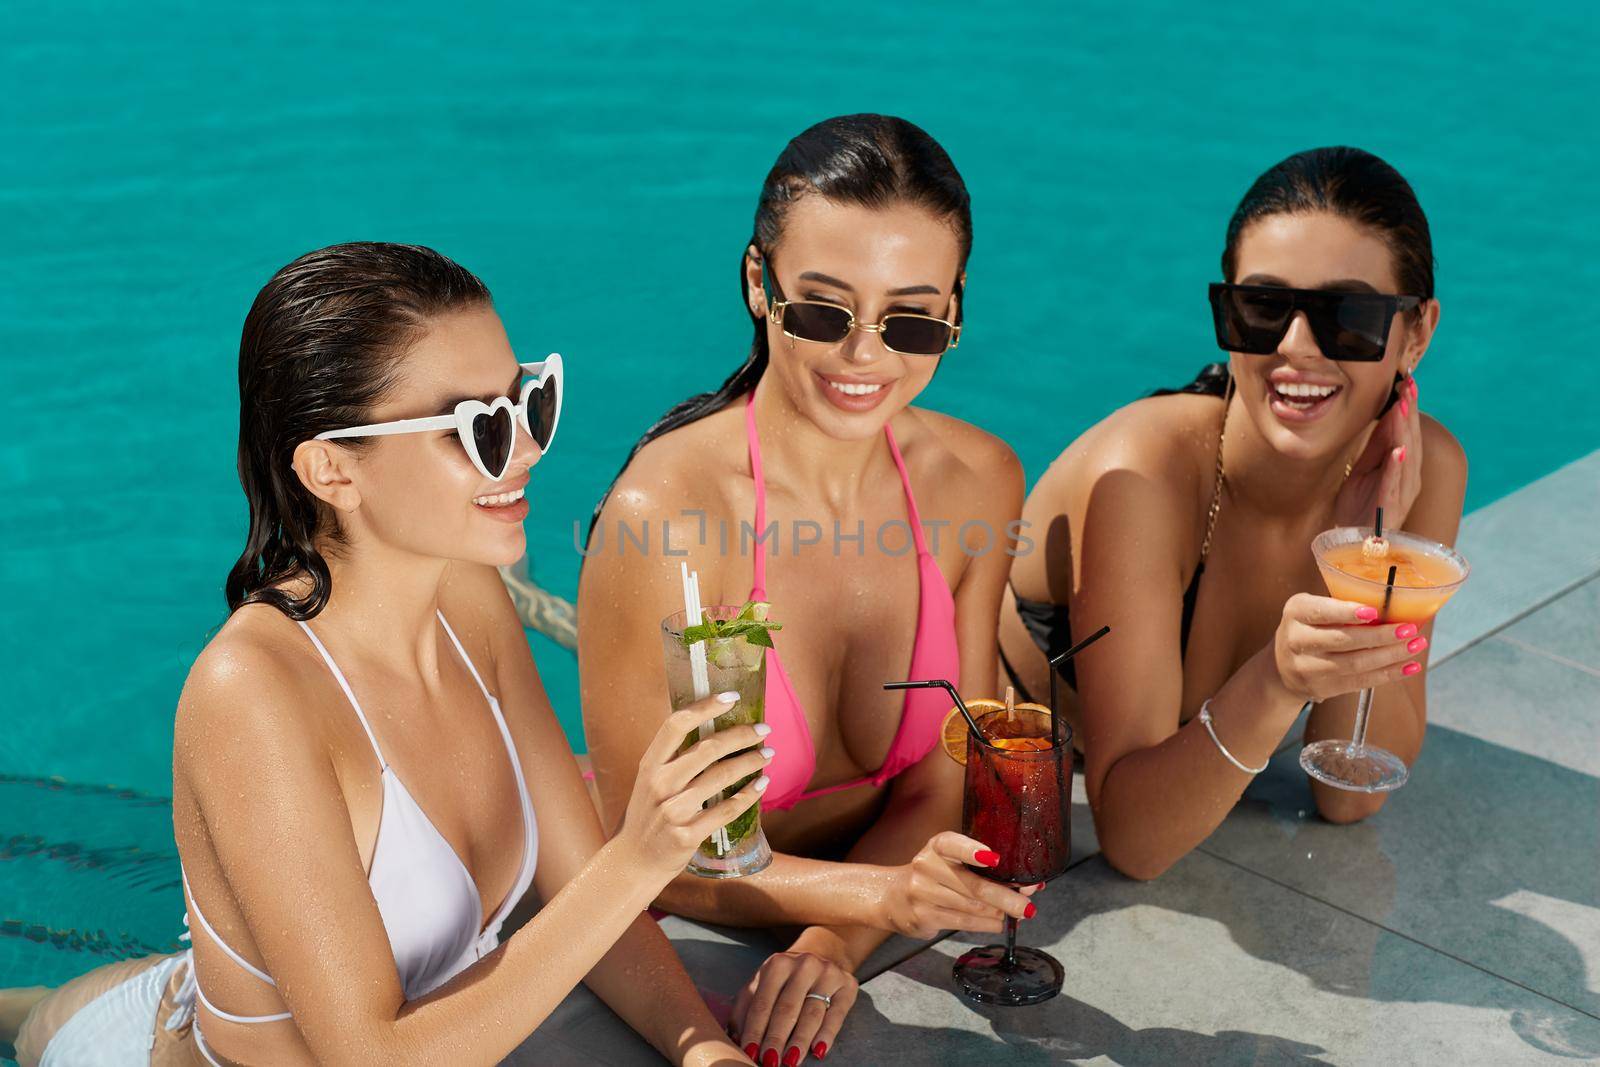 Three glamorous ladies in sunglasses sunbathing, having fun on swimming pool deck in summer. Front view of smiling women in bikinis relaxing, drinking cocktails in blue pool water. Concept of relax.